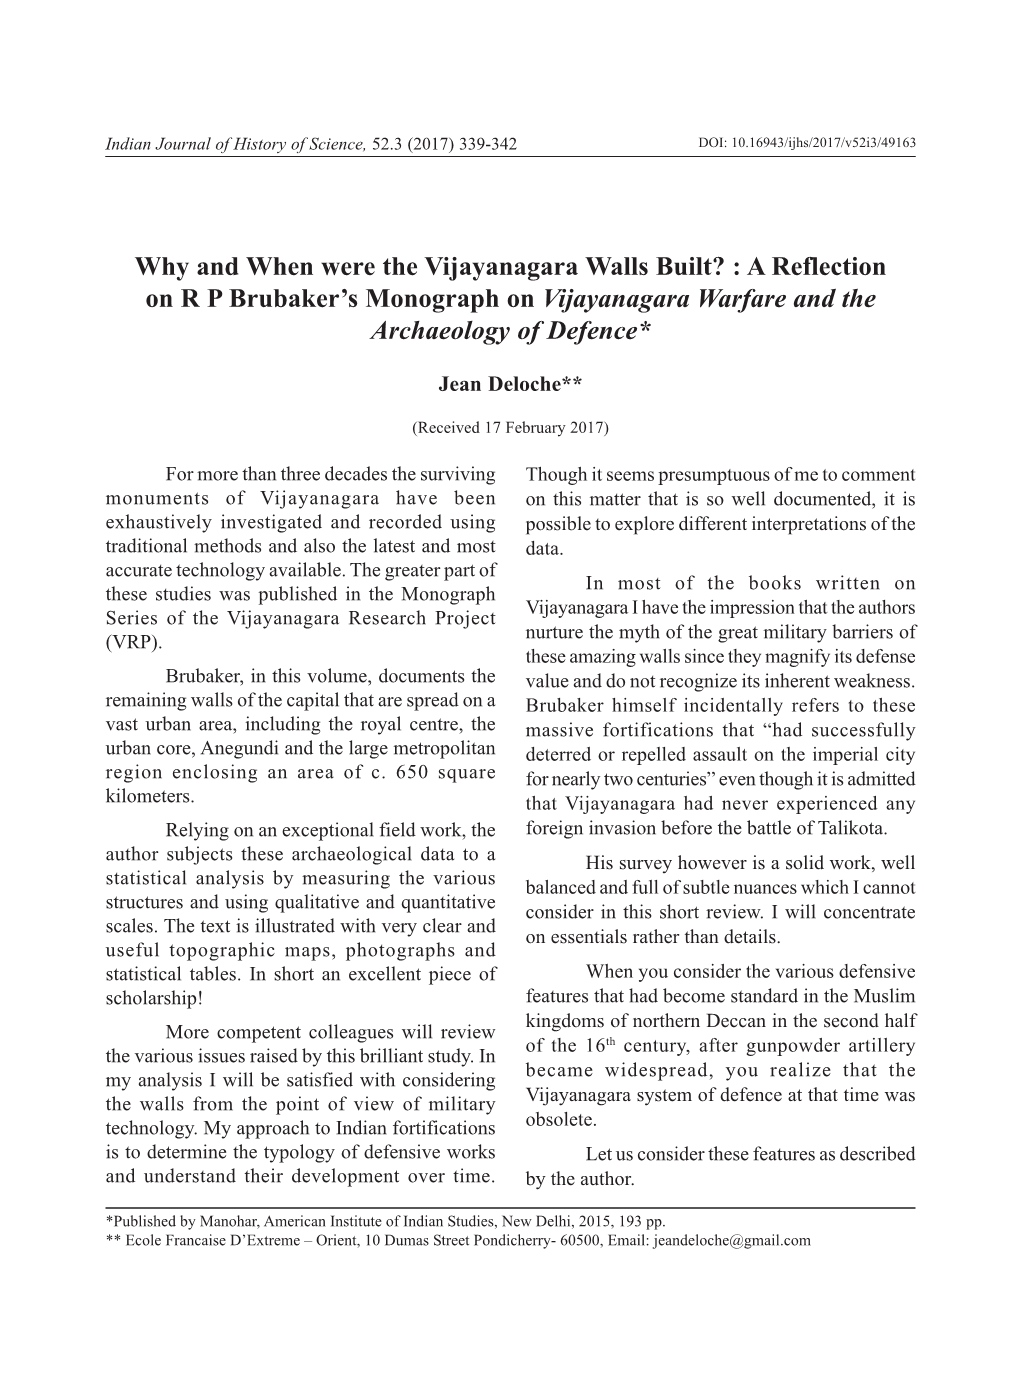 Why and When Were the Vijayanagara Walls Built? : a Reflection on R P Brubaker’S Monograph on Vijayanagara Warfare and the Archaeology of Defence*